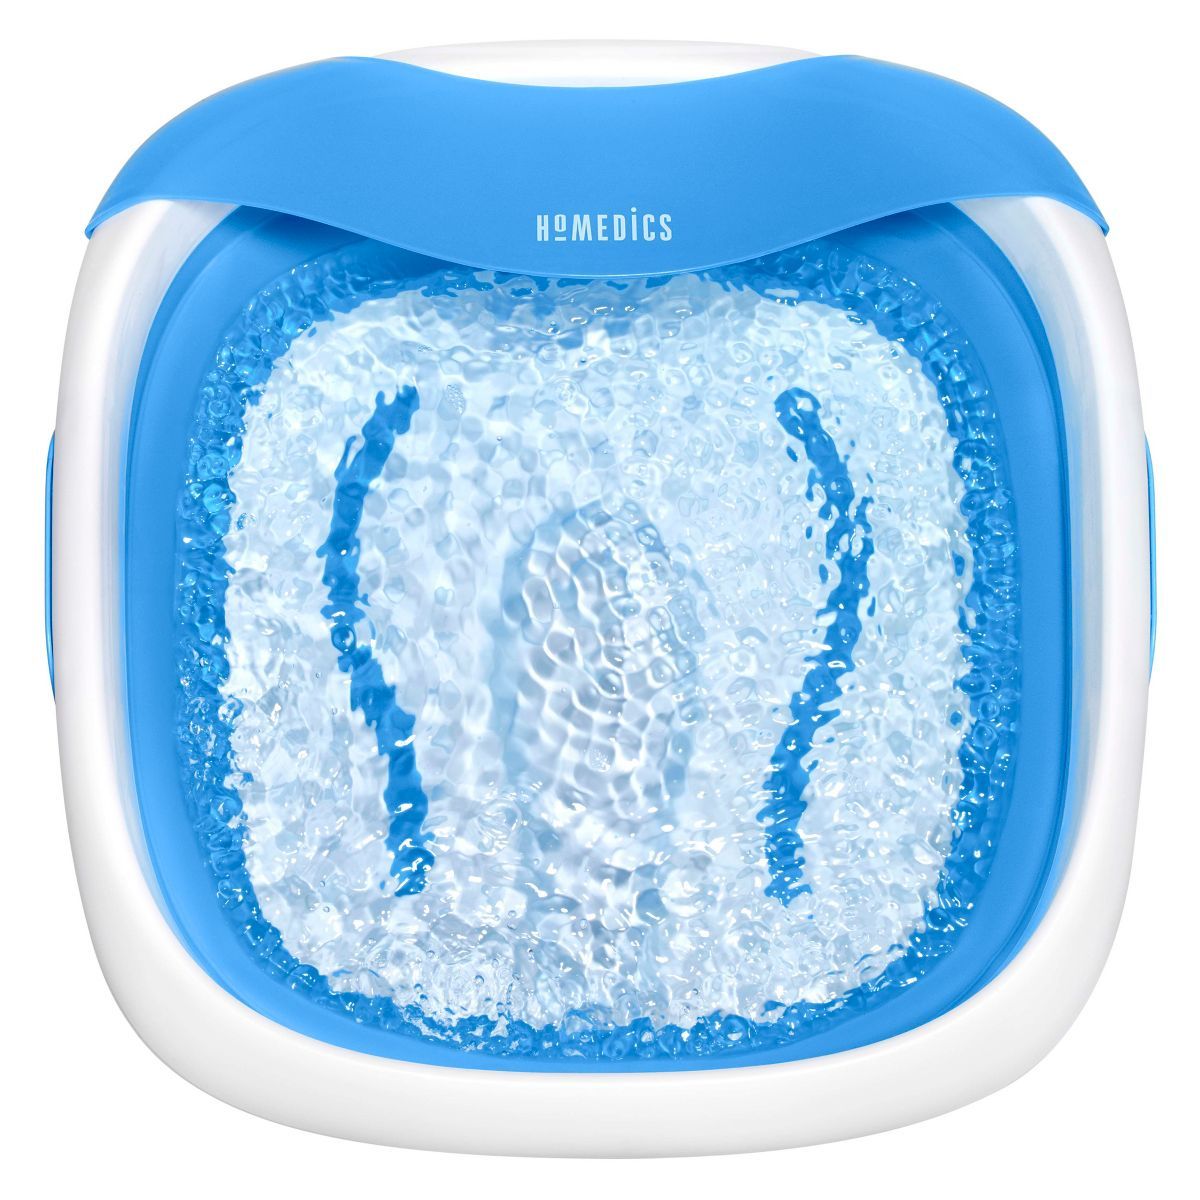 HoMedics Compact Pro Spa Collapsible Footbath with Heat | Target